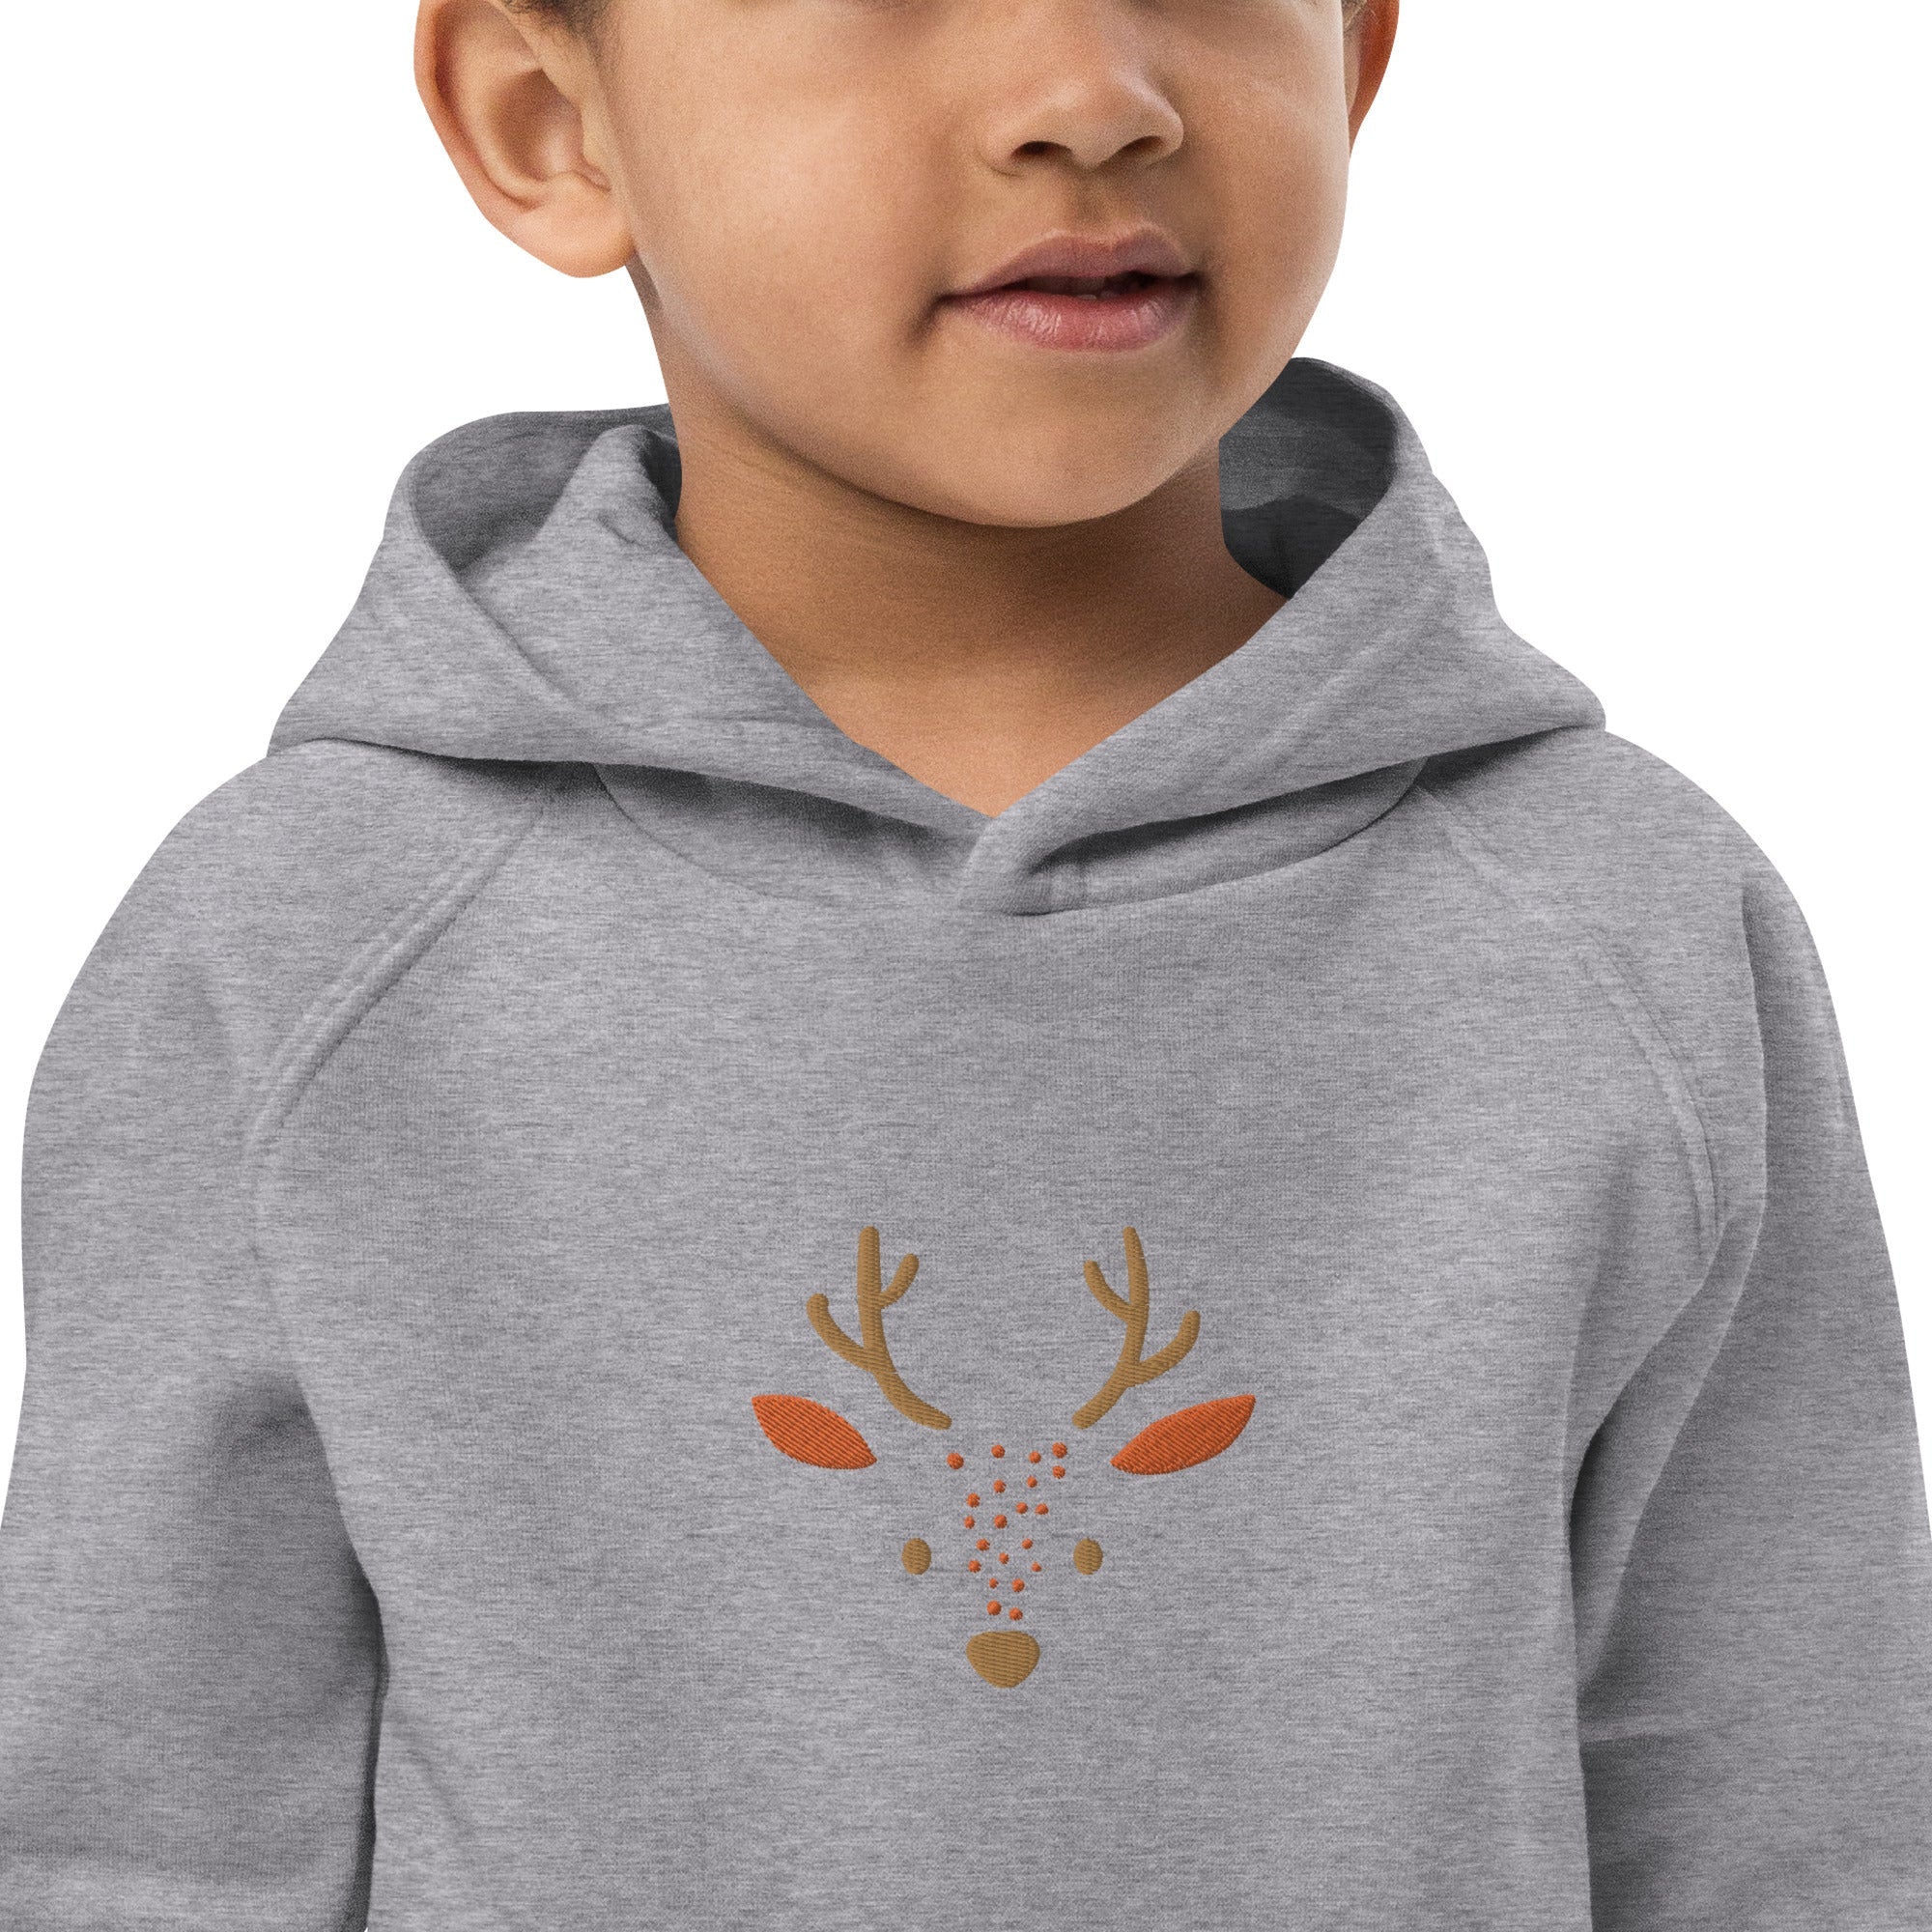 Deer 2 Kids Eco Hoodie with cute animals, Organic Cotton pullover for children, gift idea for kids, soft hoodie for kids for Christmas-3